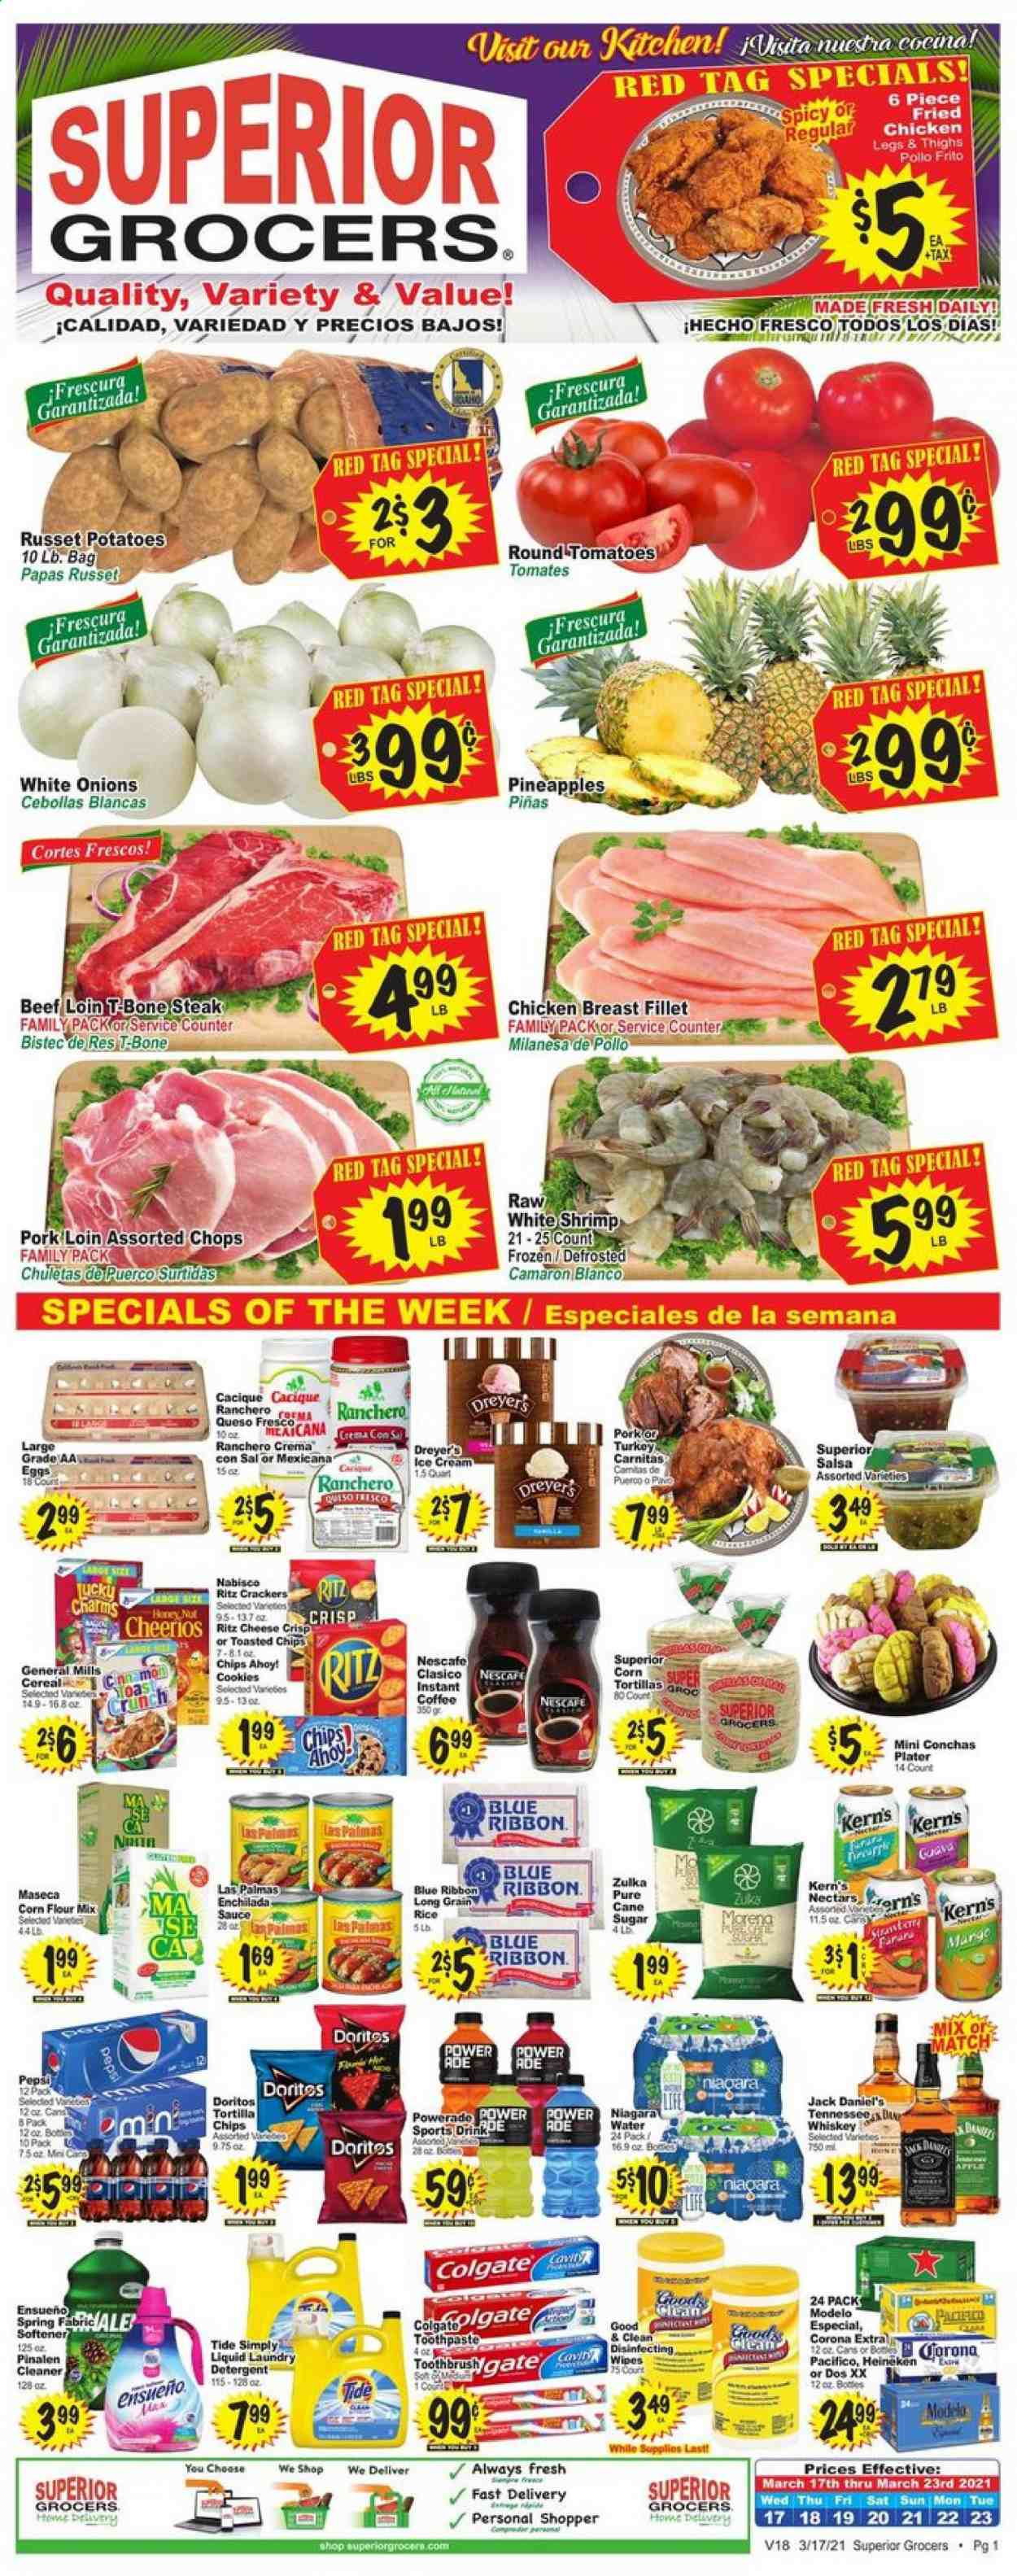 thumbnail - Superior Grocers Flyer - 03/17/2021 - 03/23/2021 - Sales products - tortillas, Blue Ribbon, chicken breasts, chicken legs, beef meat, t-bone steak, steak, pork loin, pork meat, shrimps, enchiladas, Jack Daniel's, sauce, fried chicken, queso fresco, cheese, eggs, salsa, ice cream, crackers, Chips Ahoy!, RITZ, corn tortillas, Doritos, cane sugar, flour, sugar, corn flour, enchilada sauce, Cheerios, rice, whole grain rice, long grain rice, Powerade, Pepsi, Kern's, instant coffee, Nescafé, whiskey, whisky, beer, Corona Extra, Heineken, Modelo, Tide, fabric softener, laundry detergent, Colgate, toothpaste, guava, pineapple. Page 1.